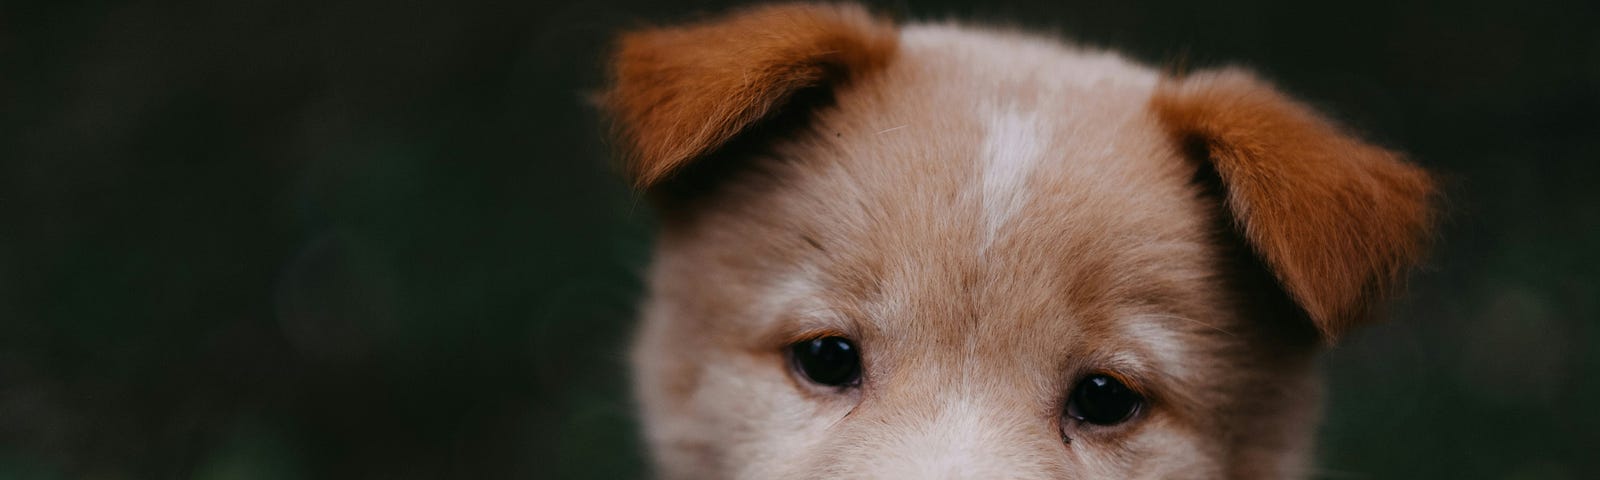 a sweet puppy looks at us, brown ears folded forward, mouth open as if smiling. Just the head and neck are shown.